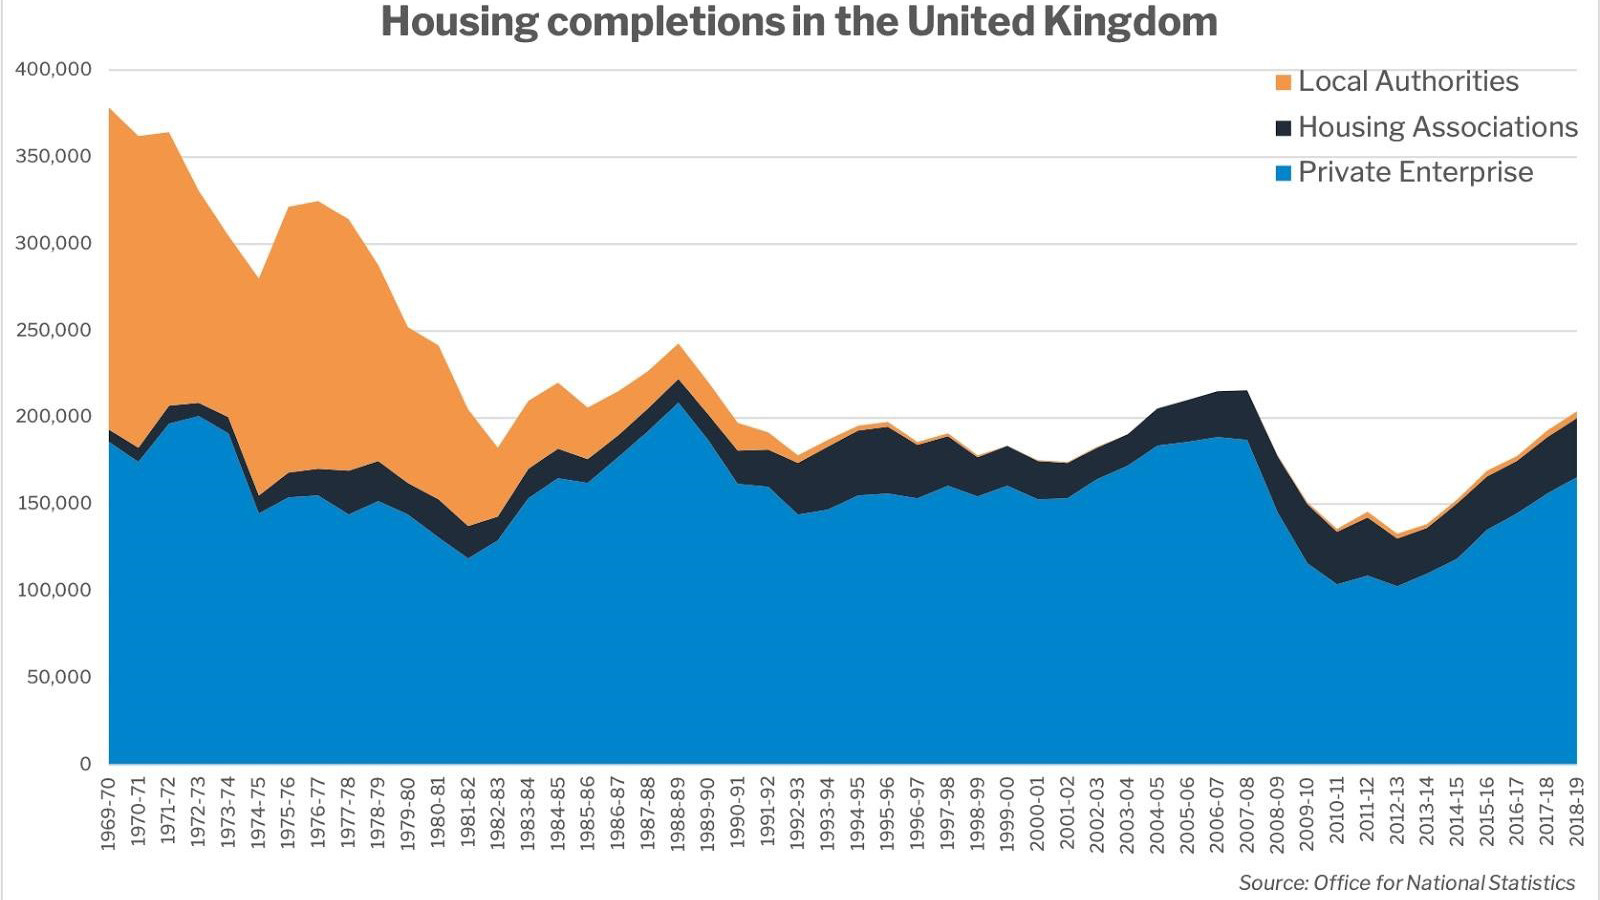 Housing completions in the UK 1969-2019